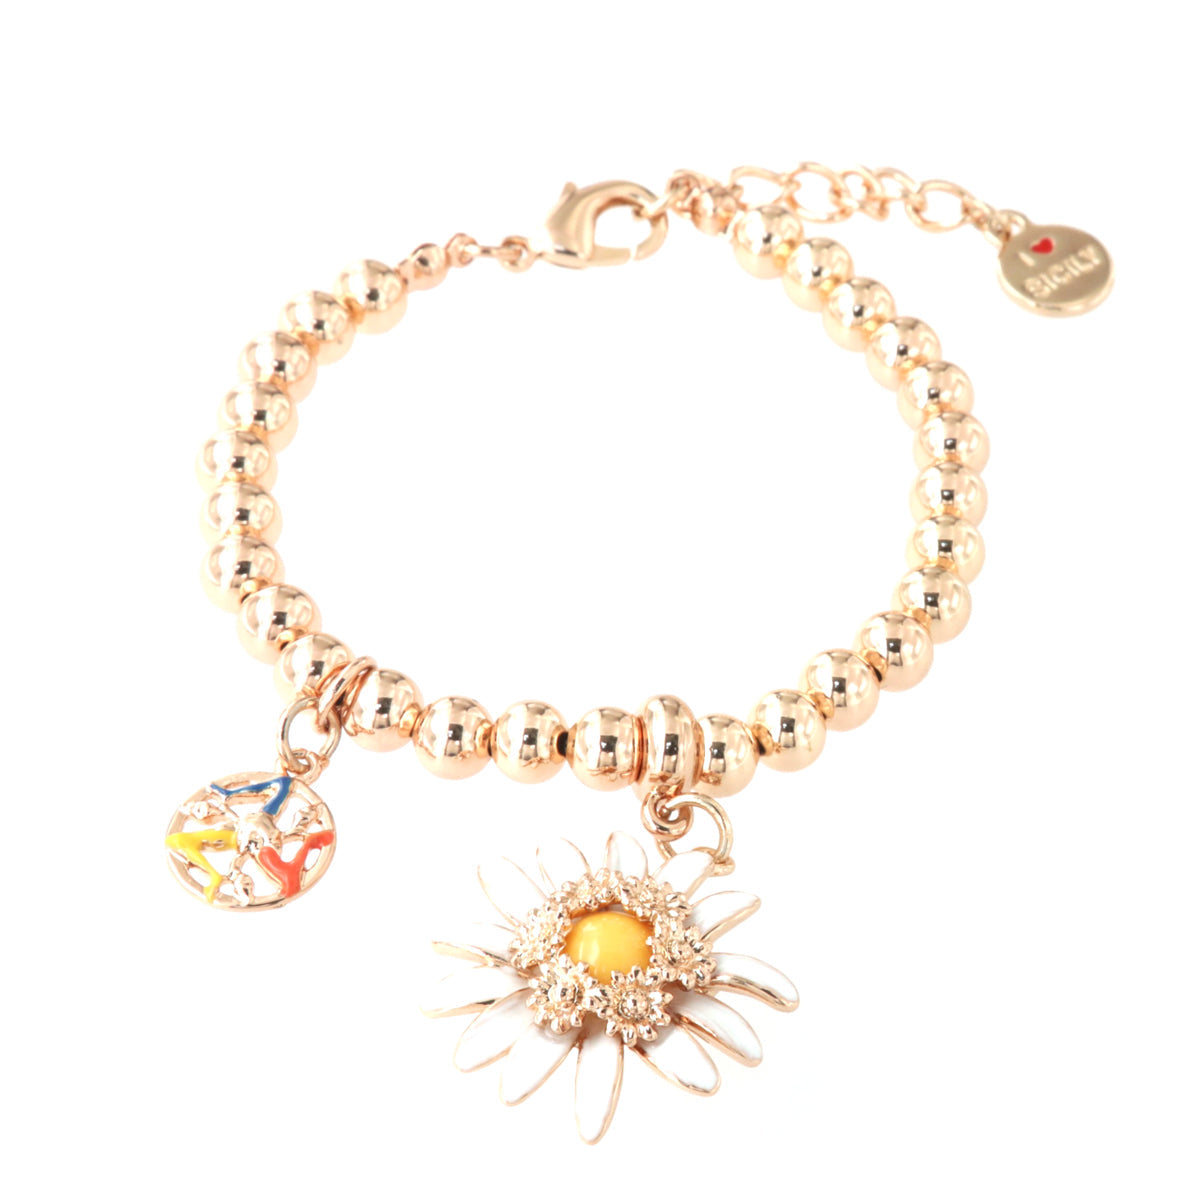 Metal bracelet spheres shirt, with Margerita pendant embellished with colored glazes